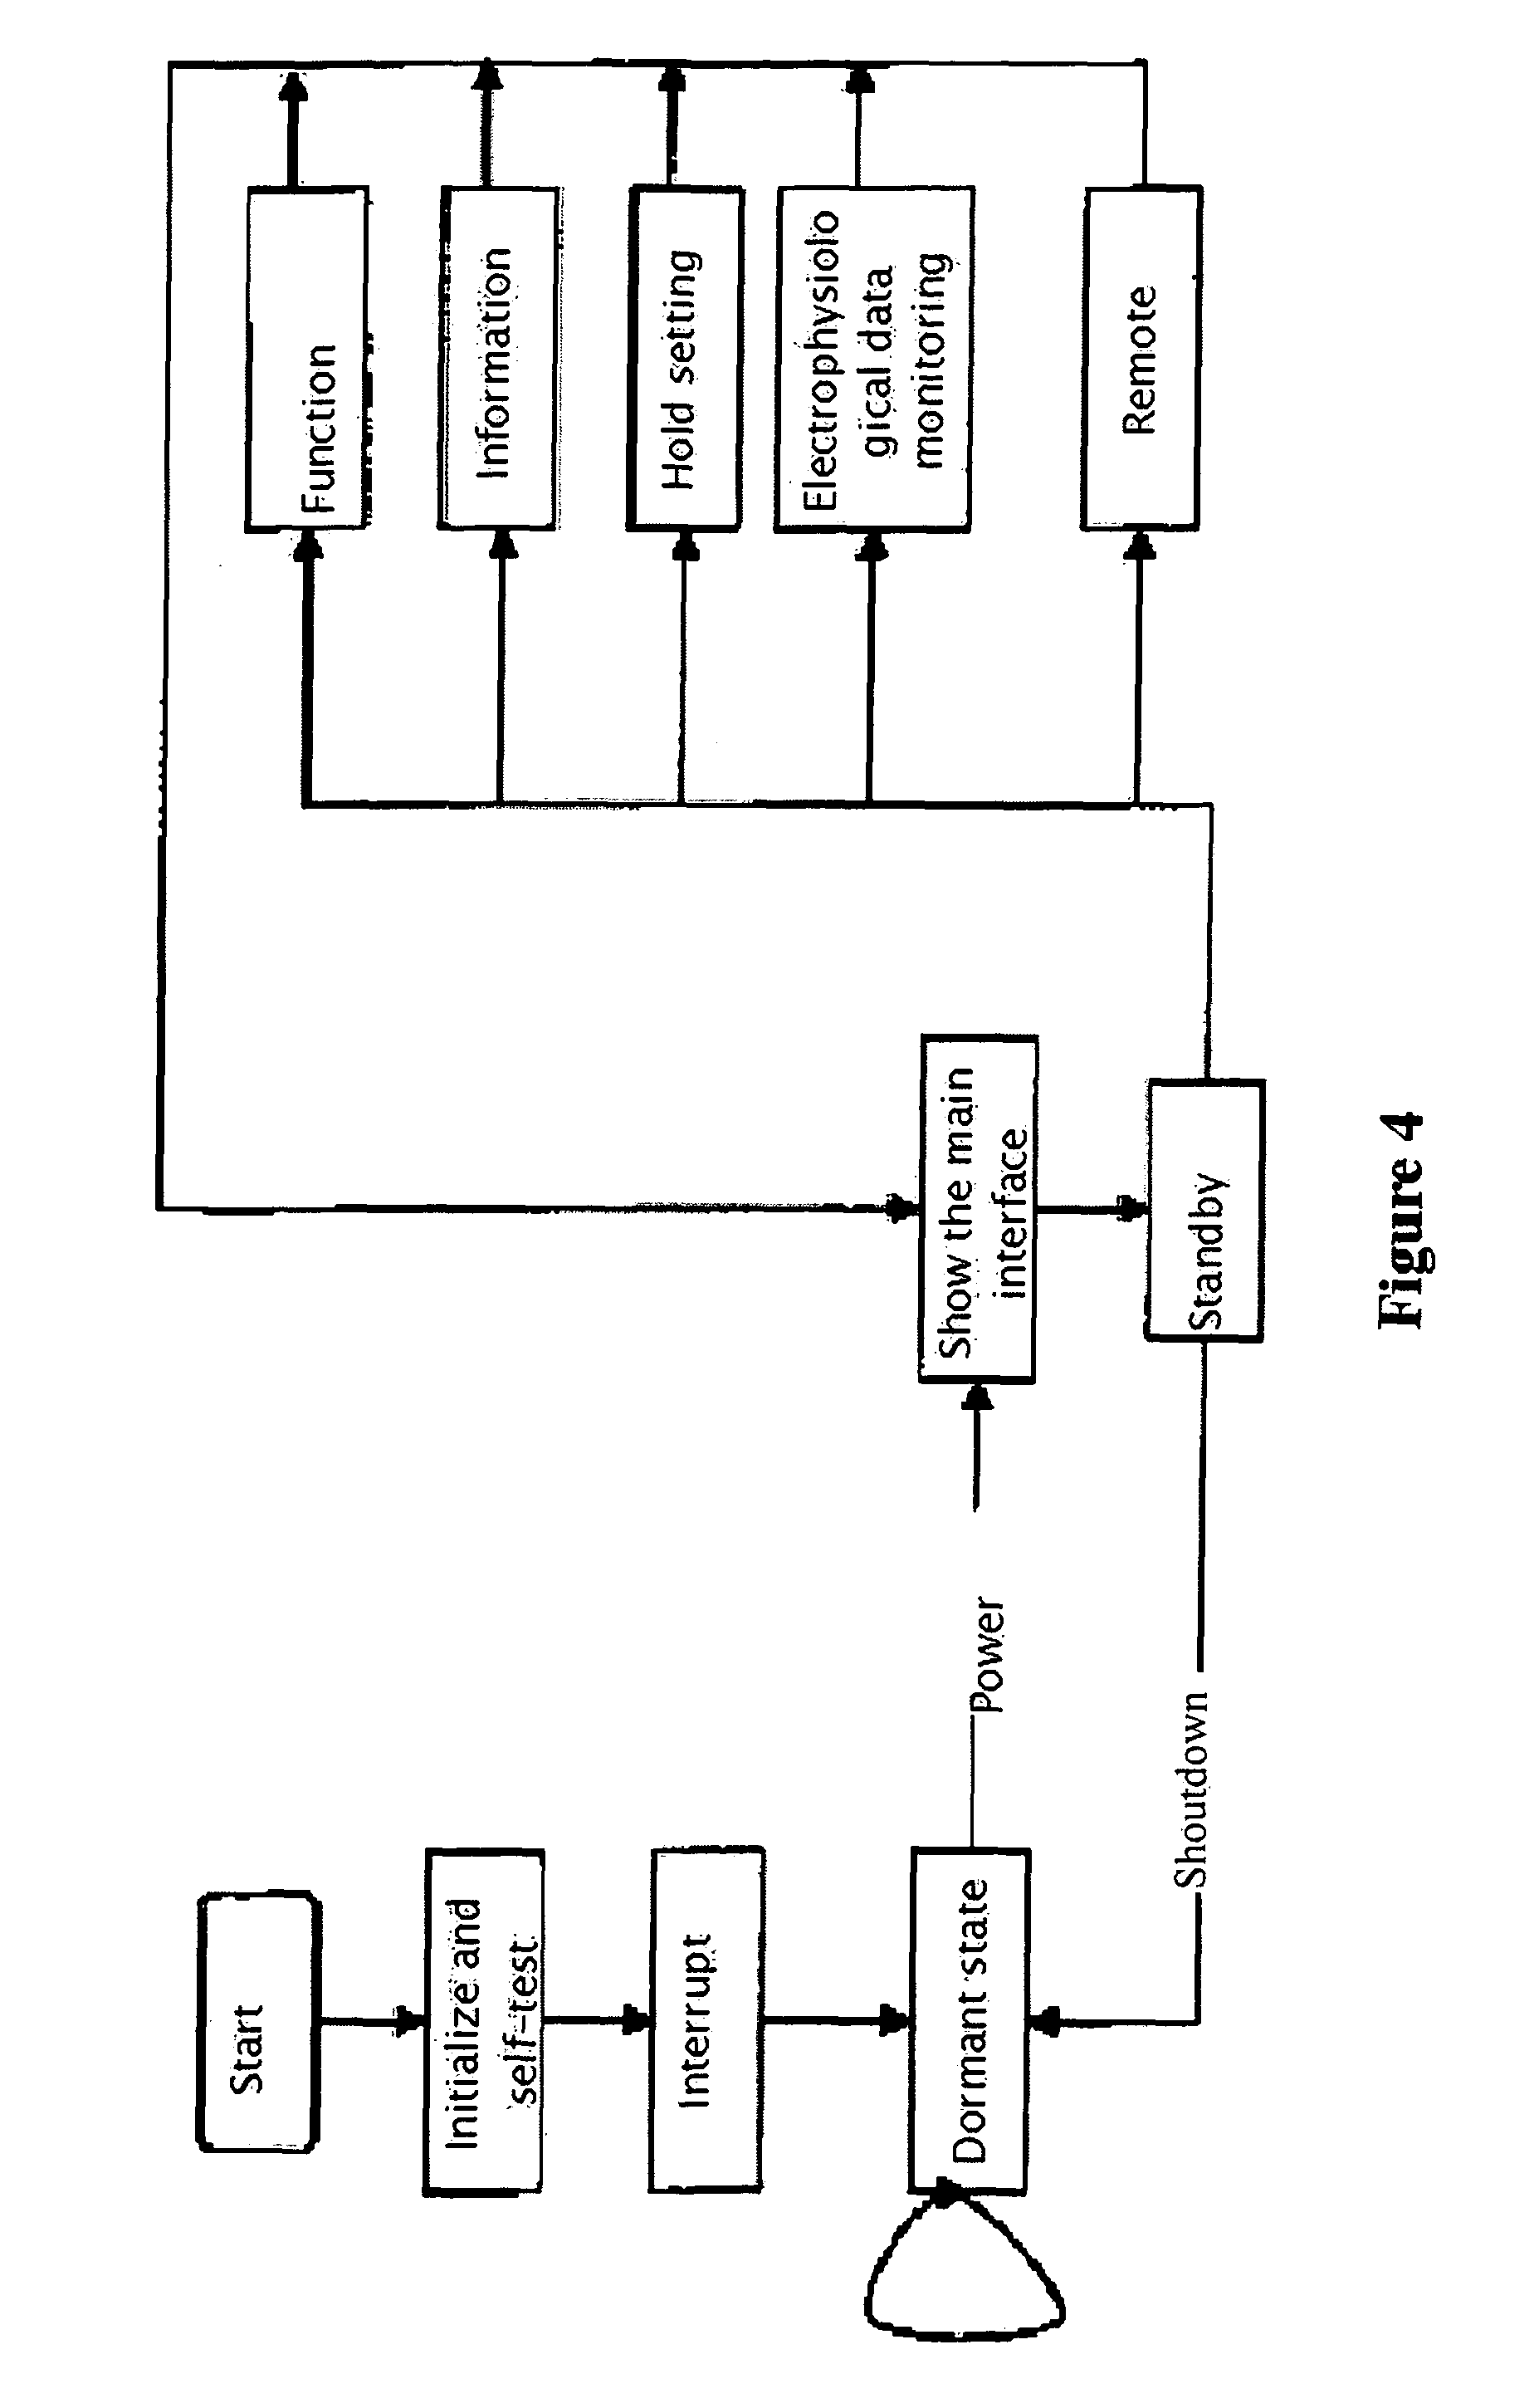 WAN-based remote mobile monitoring method and device of electrophysiological data